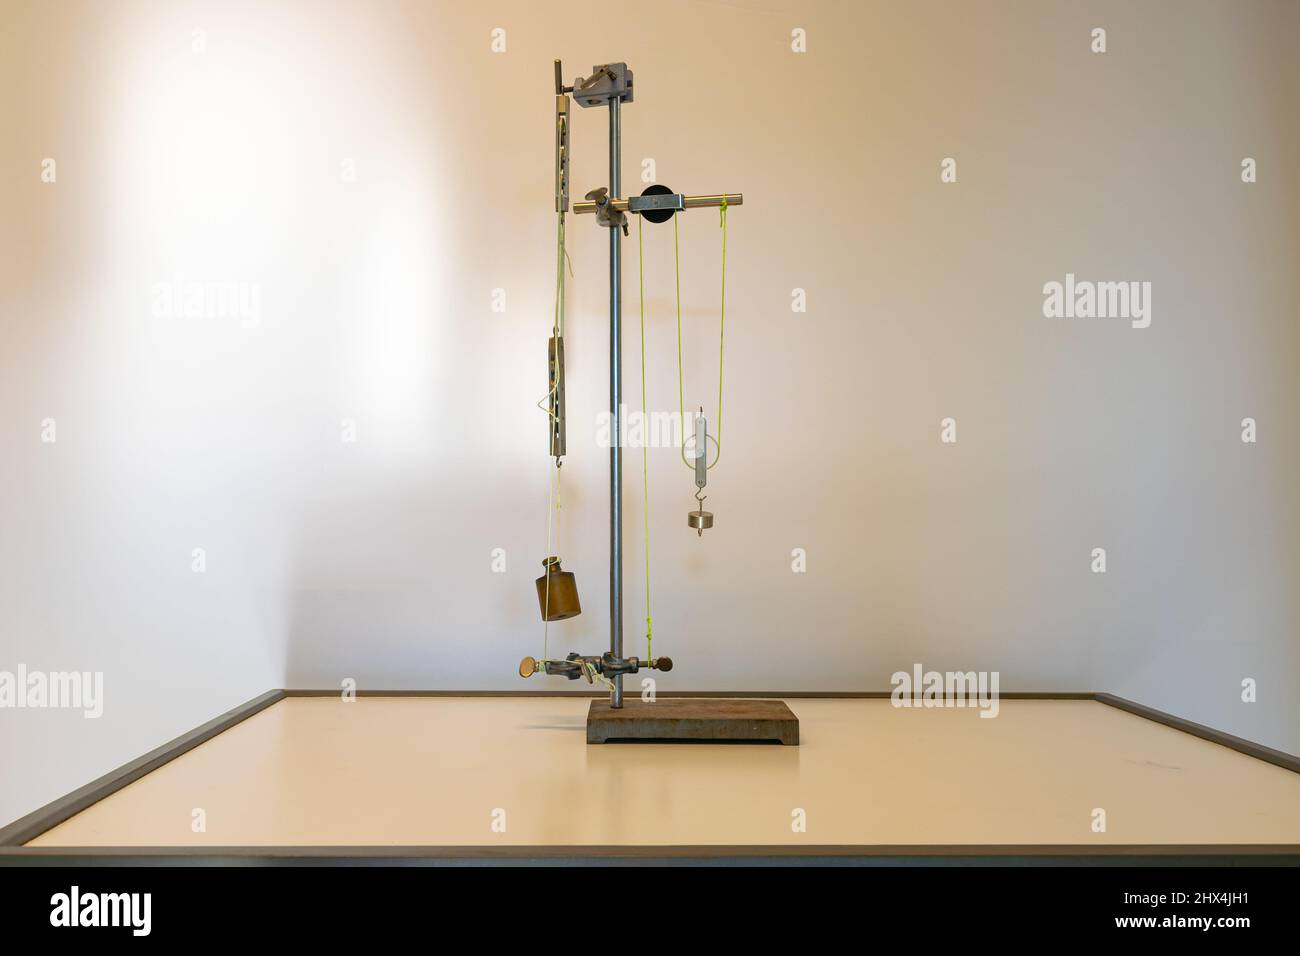 System of pulleys, ropes and weights on a tripod. Used in physics class to demonstrate the concept of 'forces' in mechanics. Stock Photo